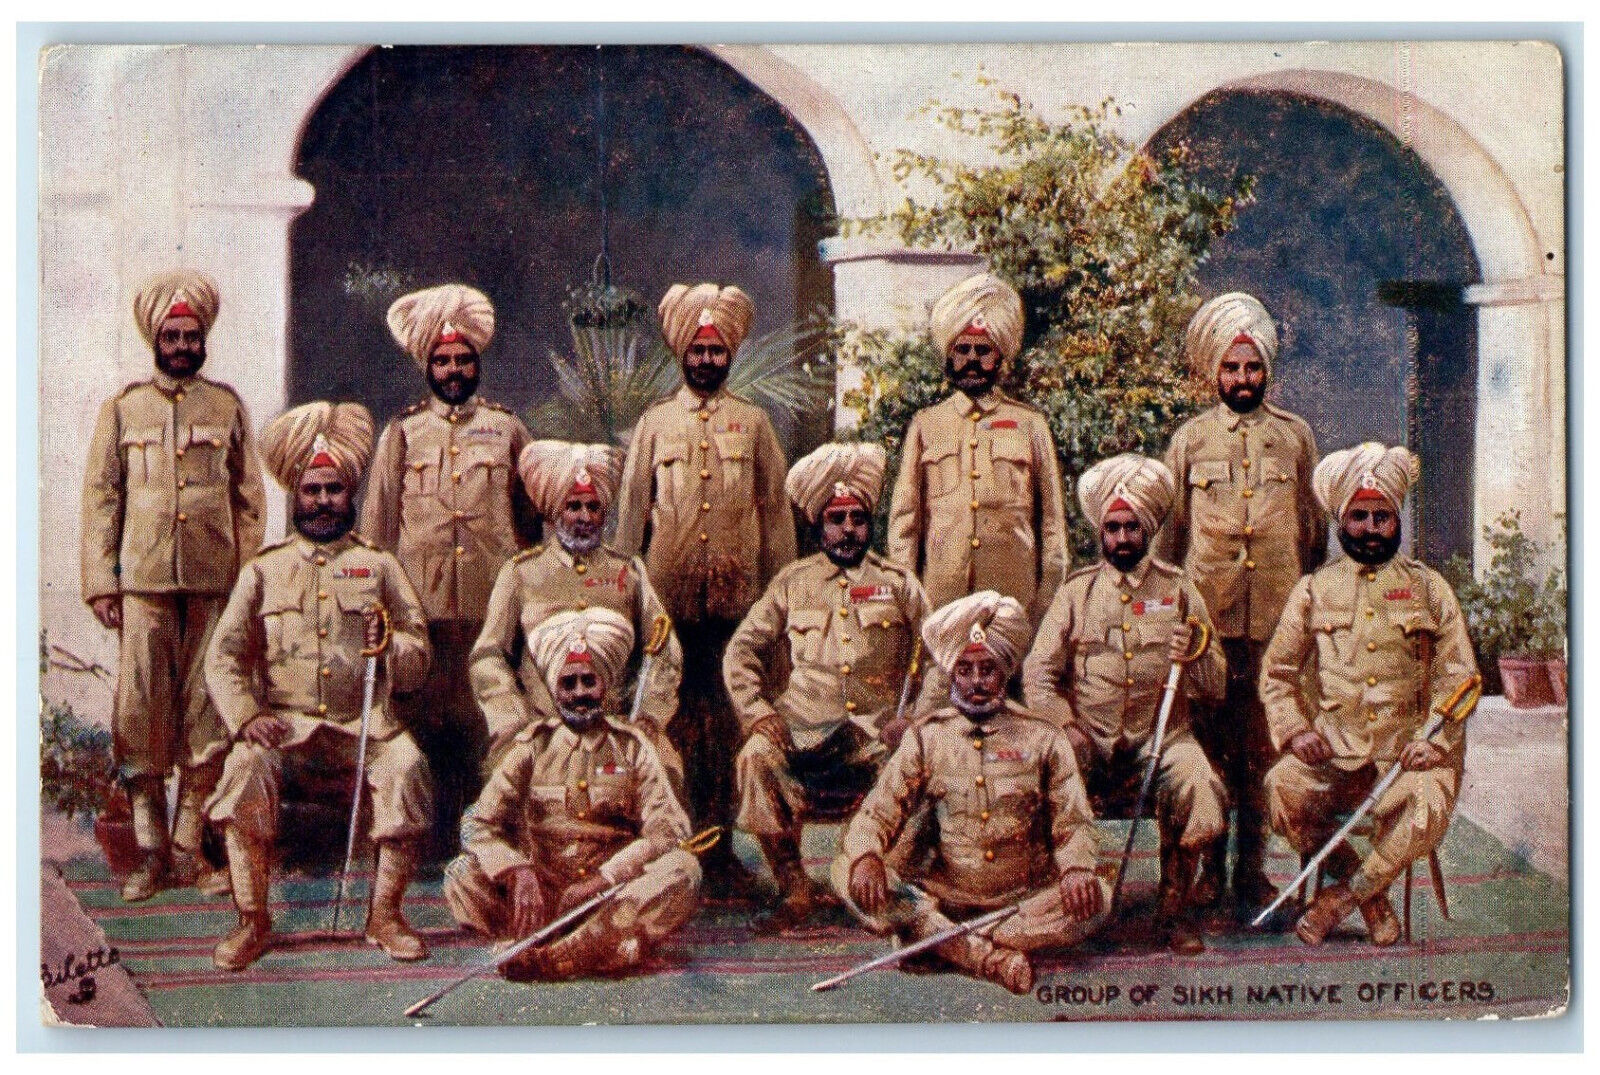 c1910 Group of Sikh Native Officers Indian Army Oilette Tuck Art Postcard